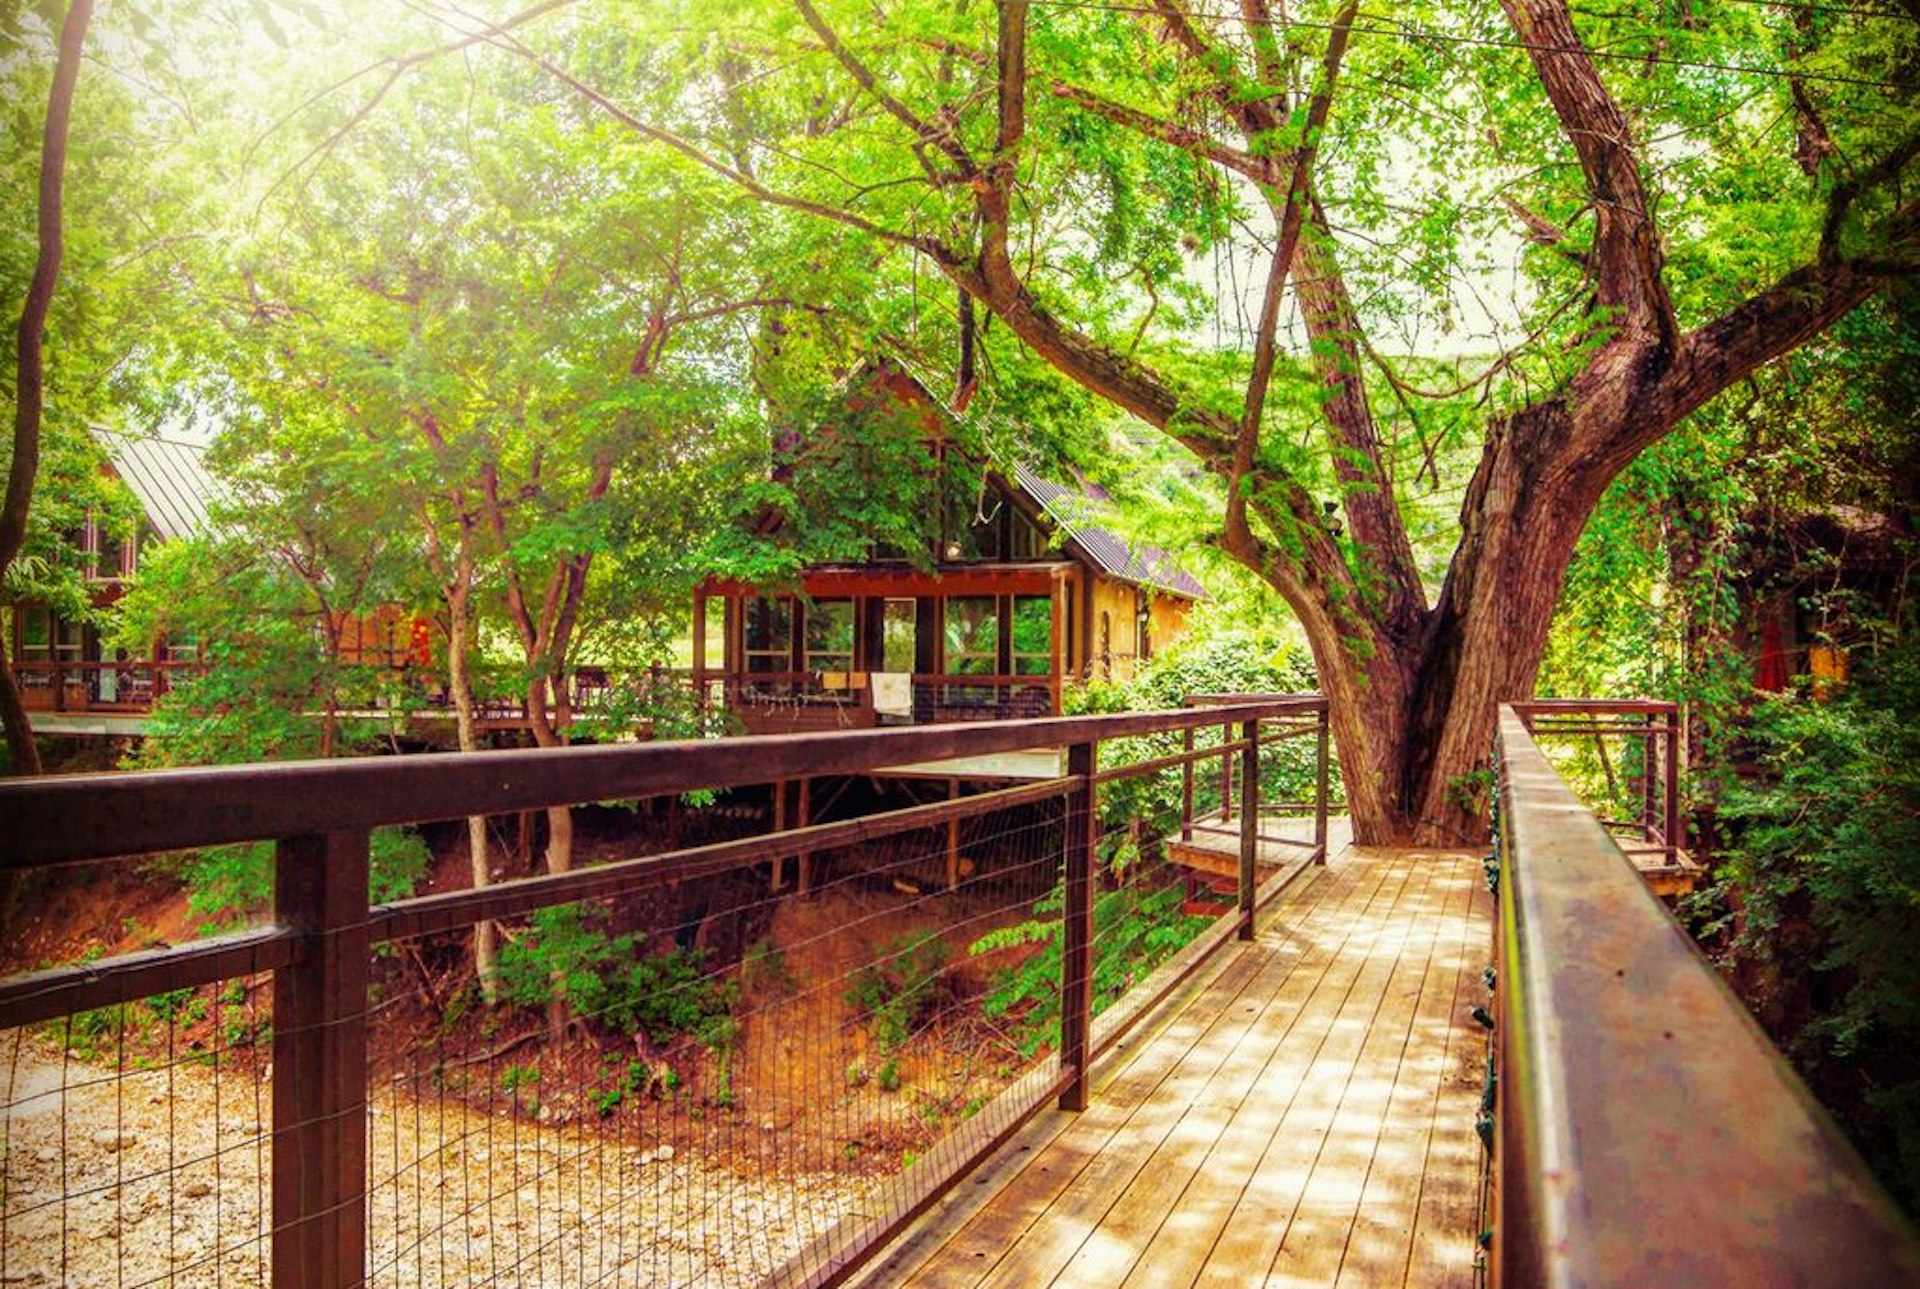 A wooden walkway surrounds a large living tree with a tree house in the background at River Road Treehouses in New Braunfels, Texas